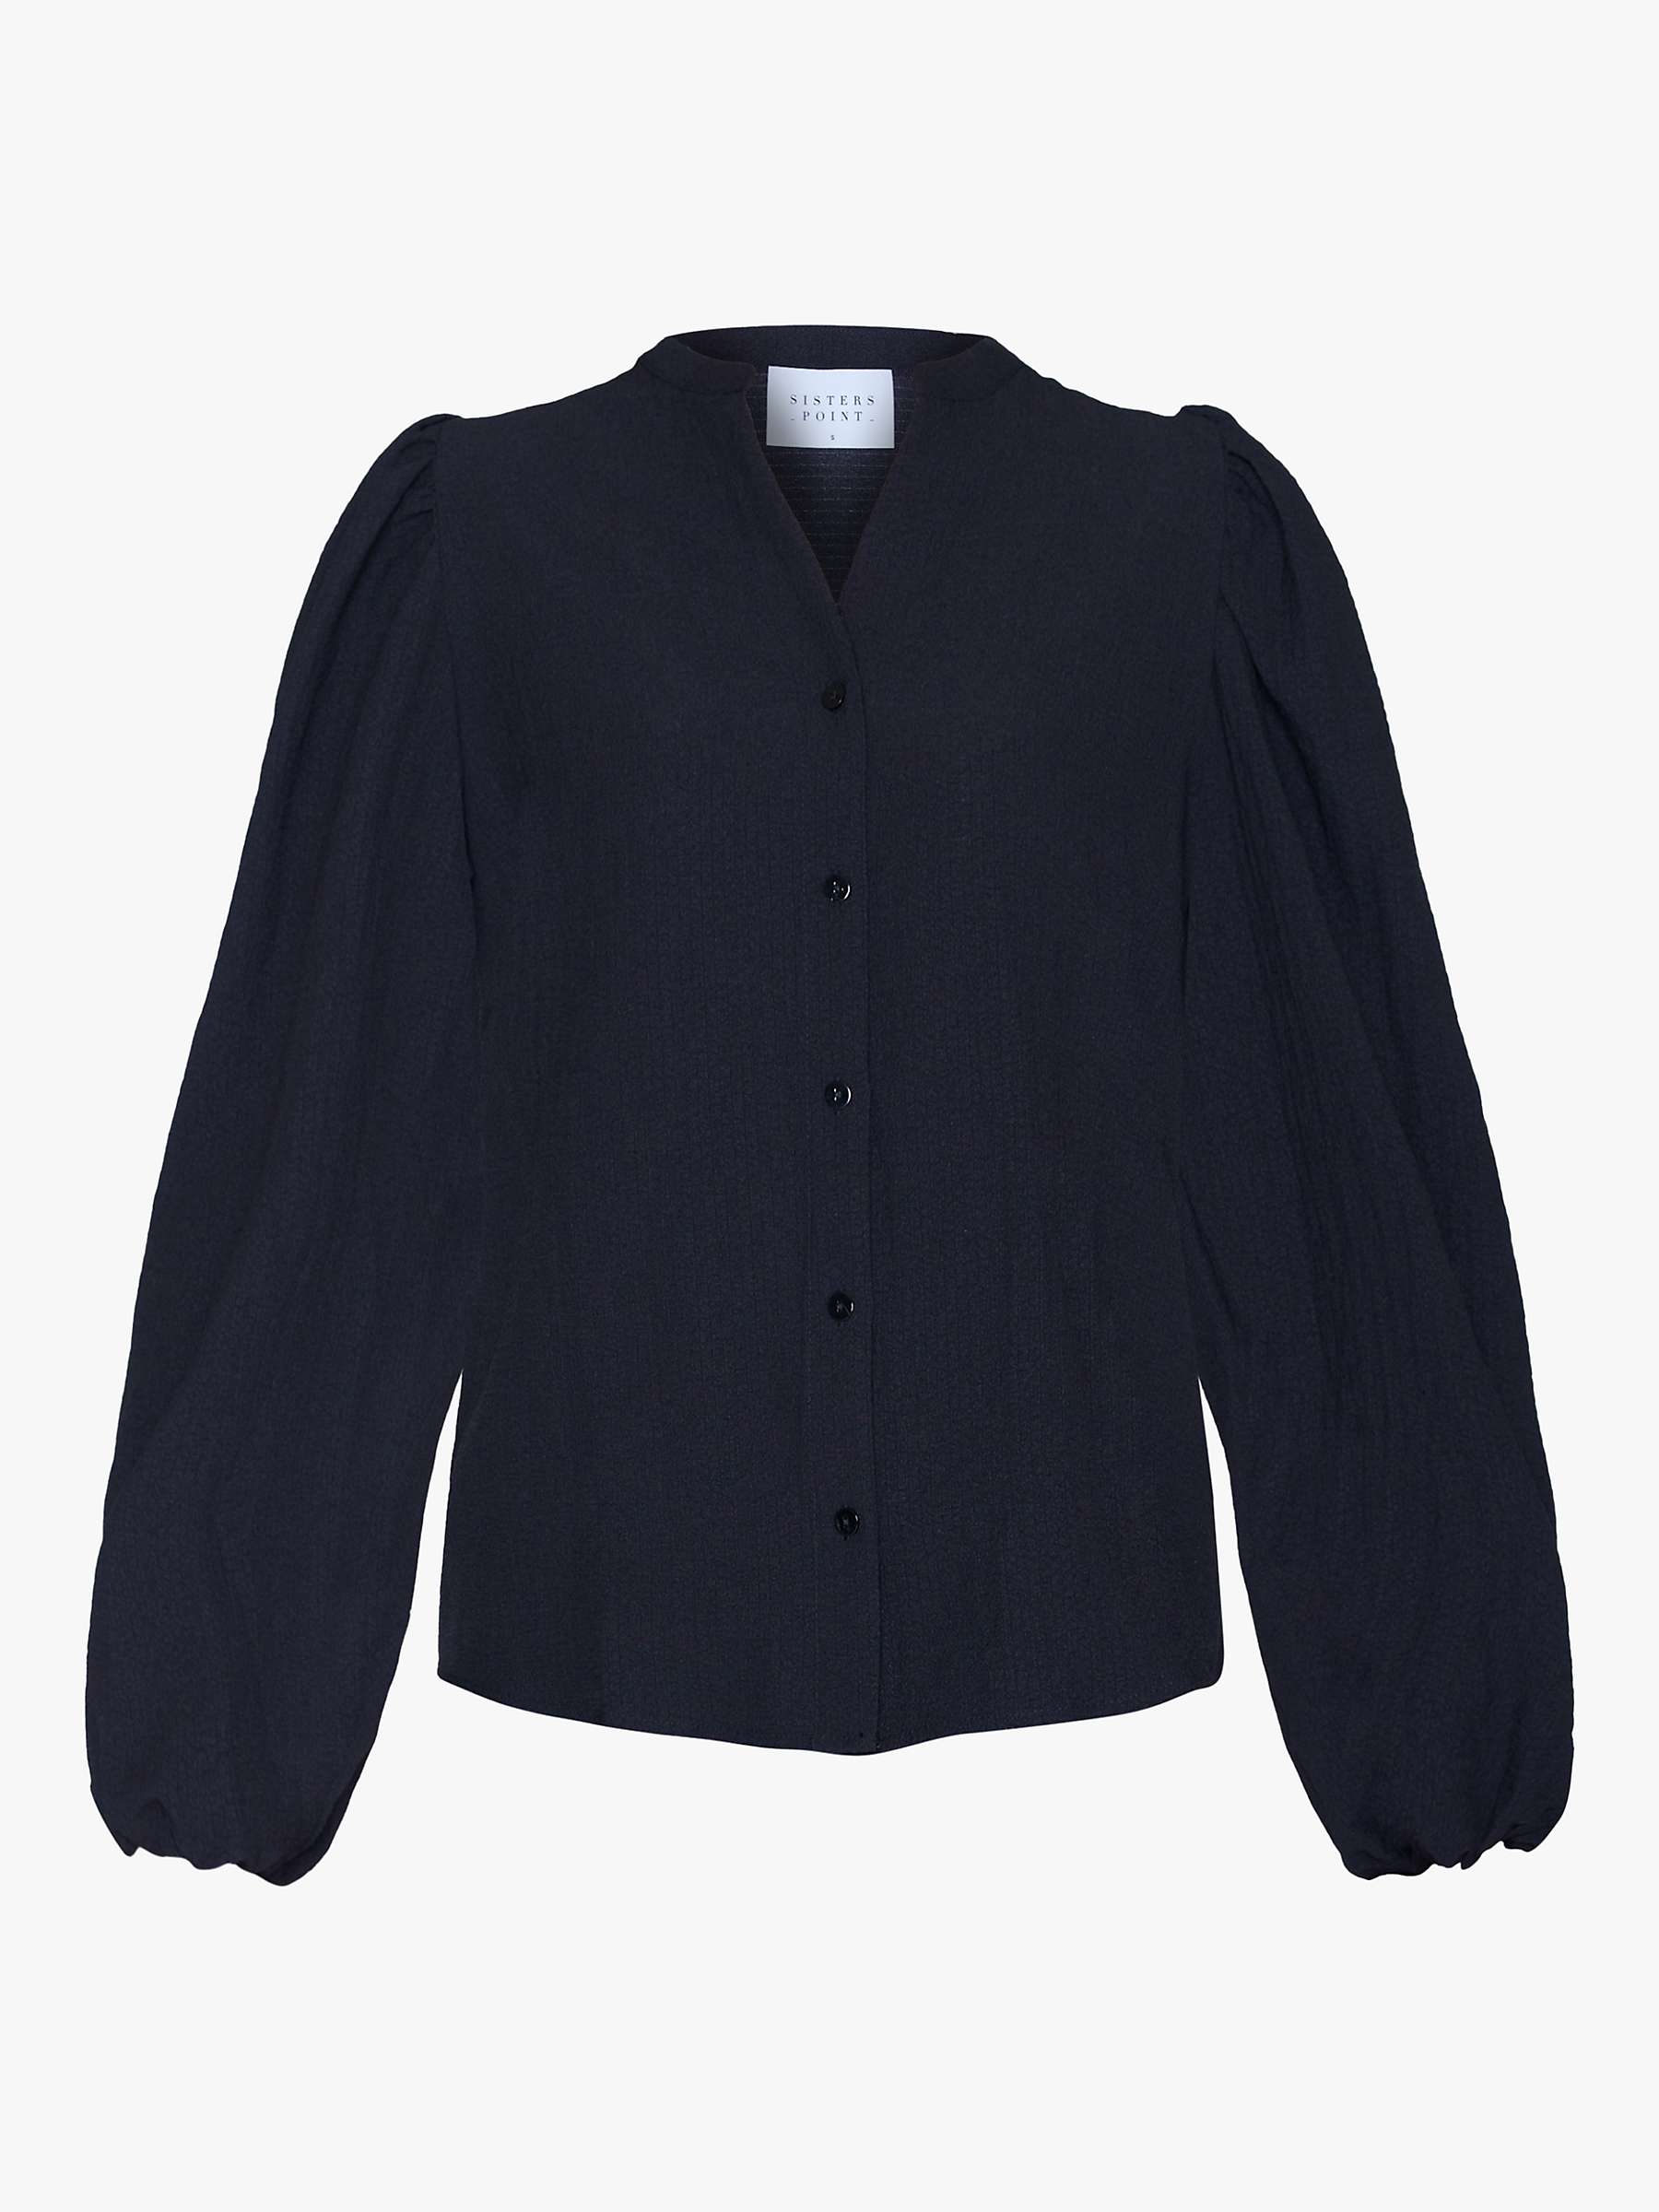 Buy Sisters Point Varia Loose Fitted Soft Shirt, Black Online at johnlewis.com